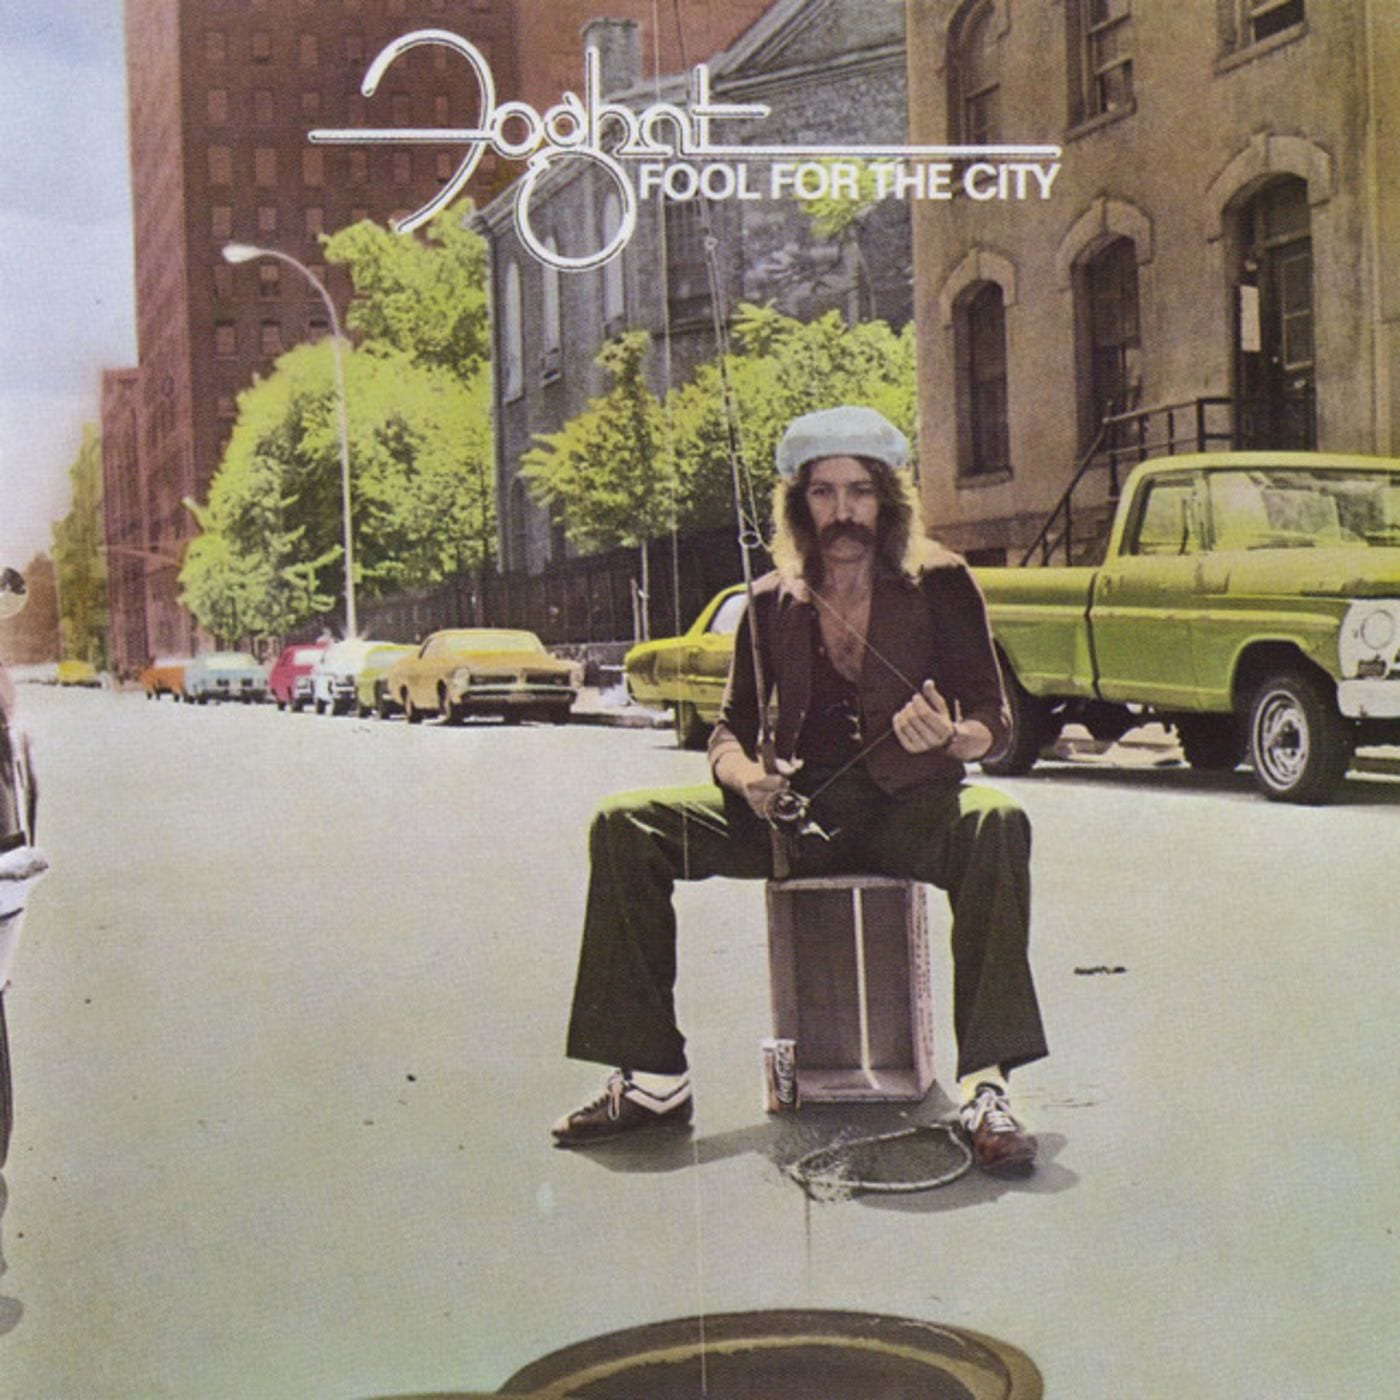 Foghat’s ‘Fool for the City’ Provided a Slow Ride to Stardom 45 Years Ago